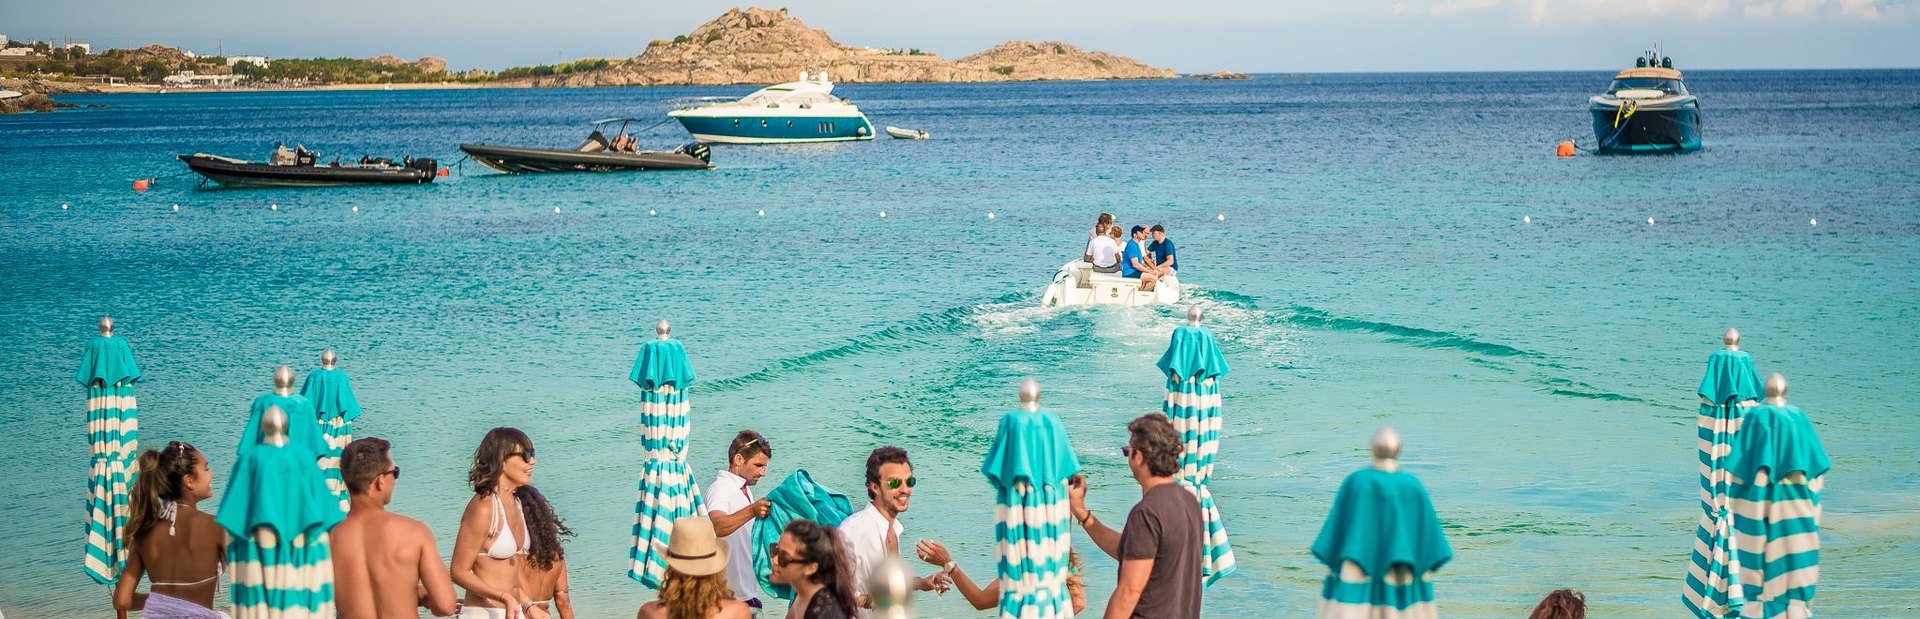 See and be seen: The Mediterranean beach clubs loved by celebrities